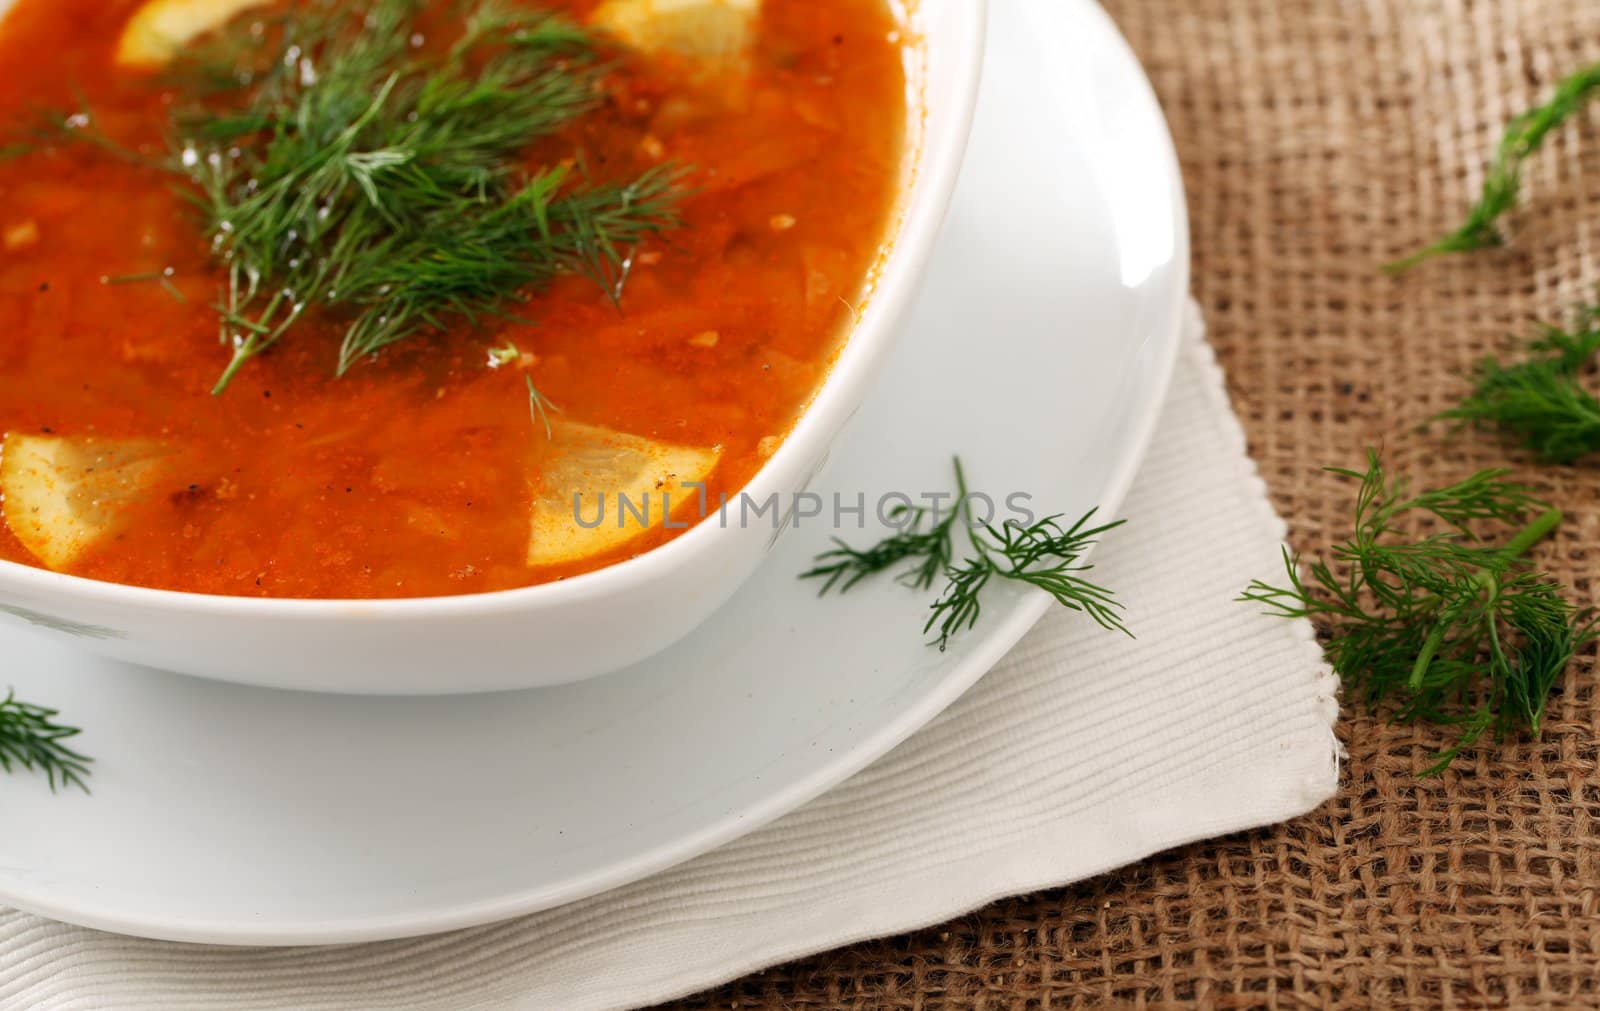 Image of bowl of hot red soup served with parsley on brown tablecloth